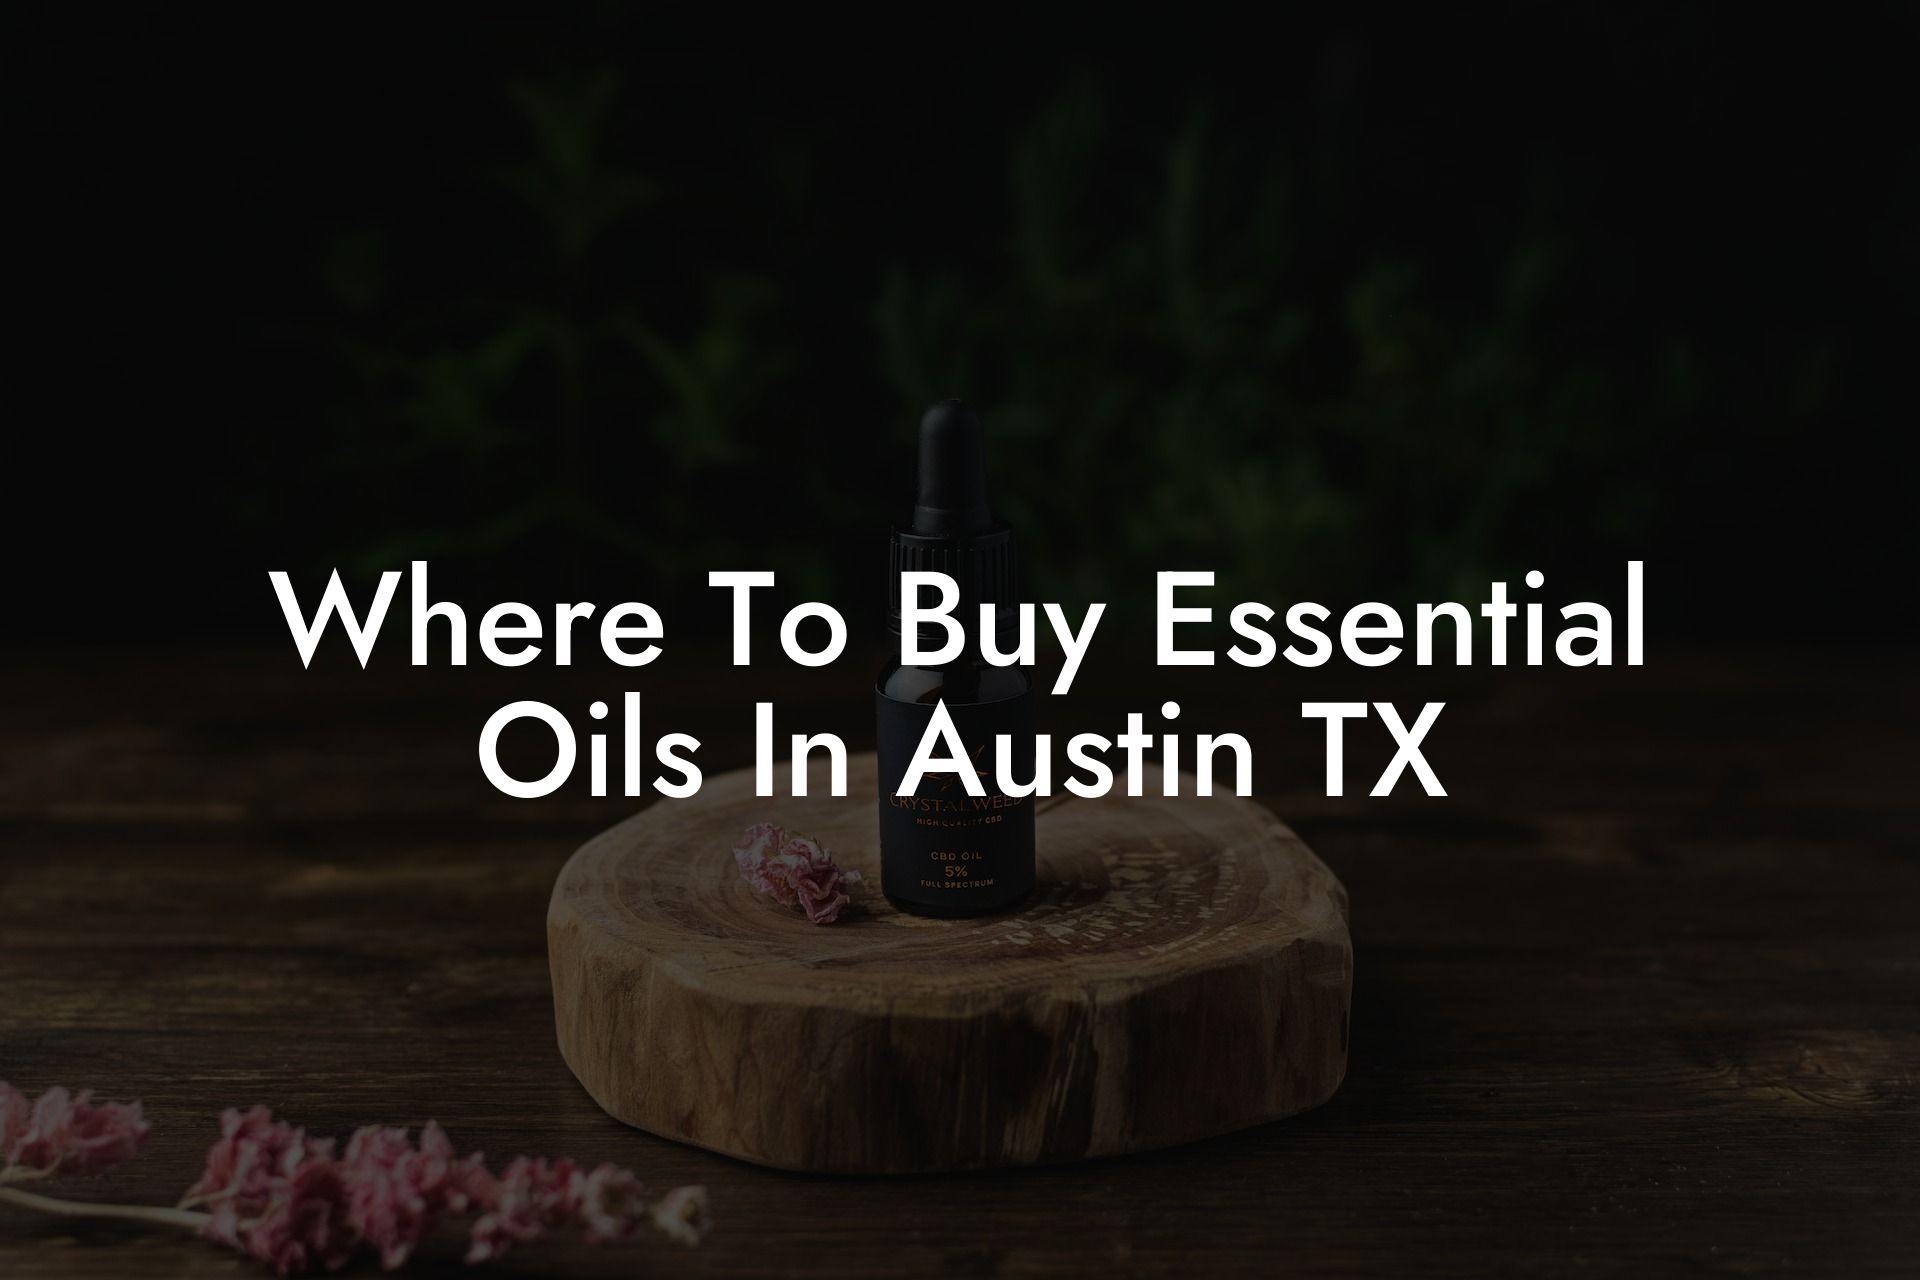 Where To Buy Essential Oils In Austin TX